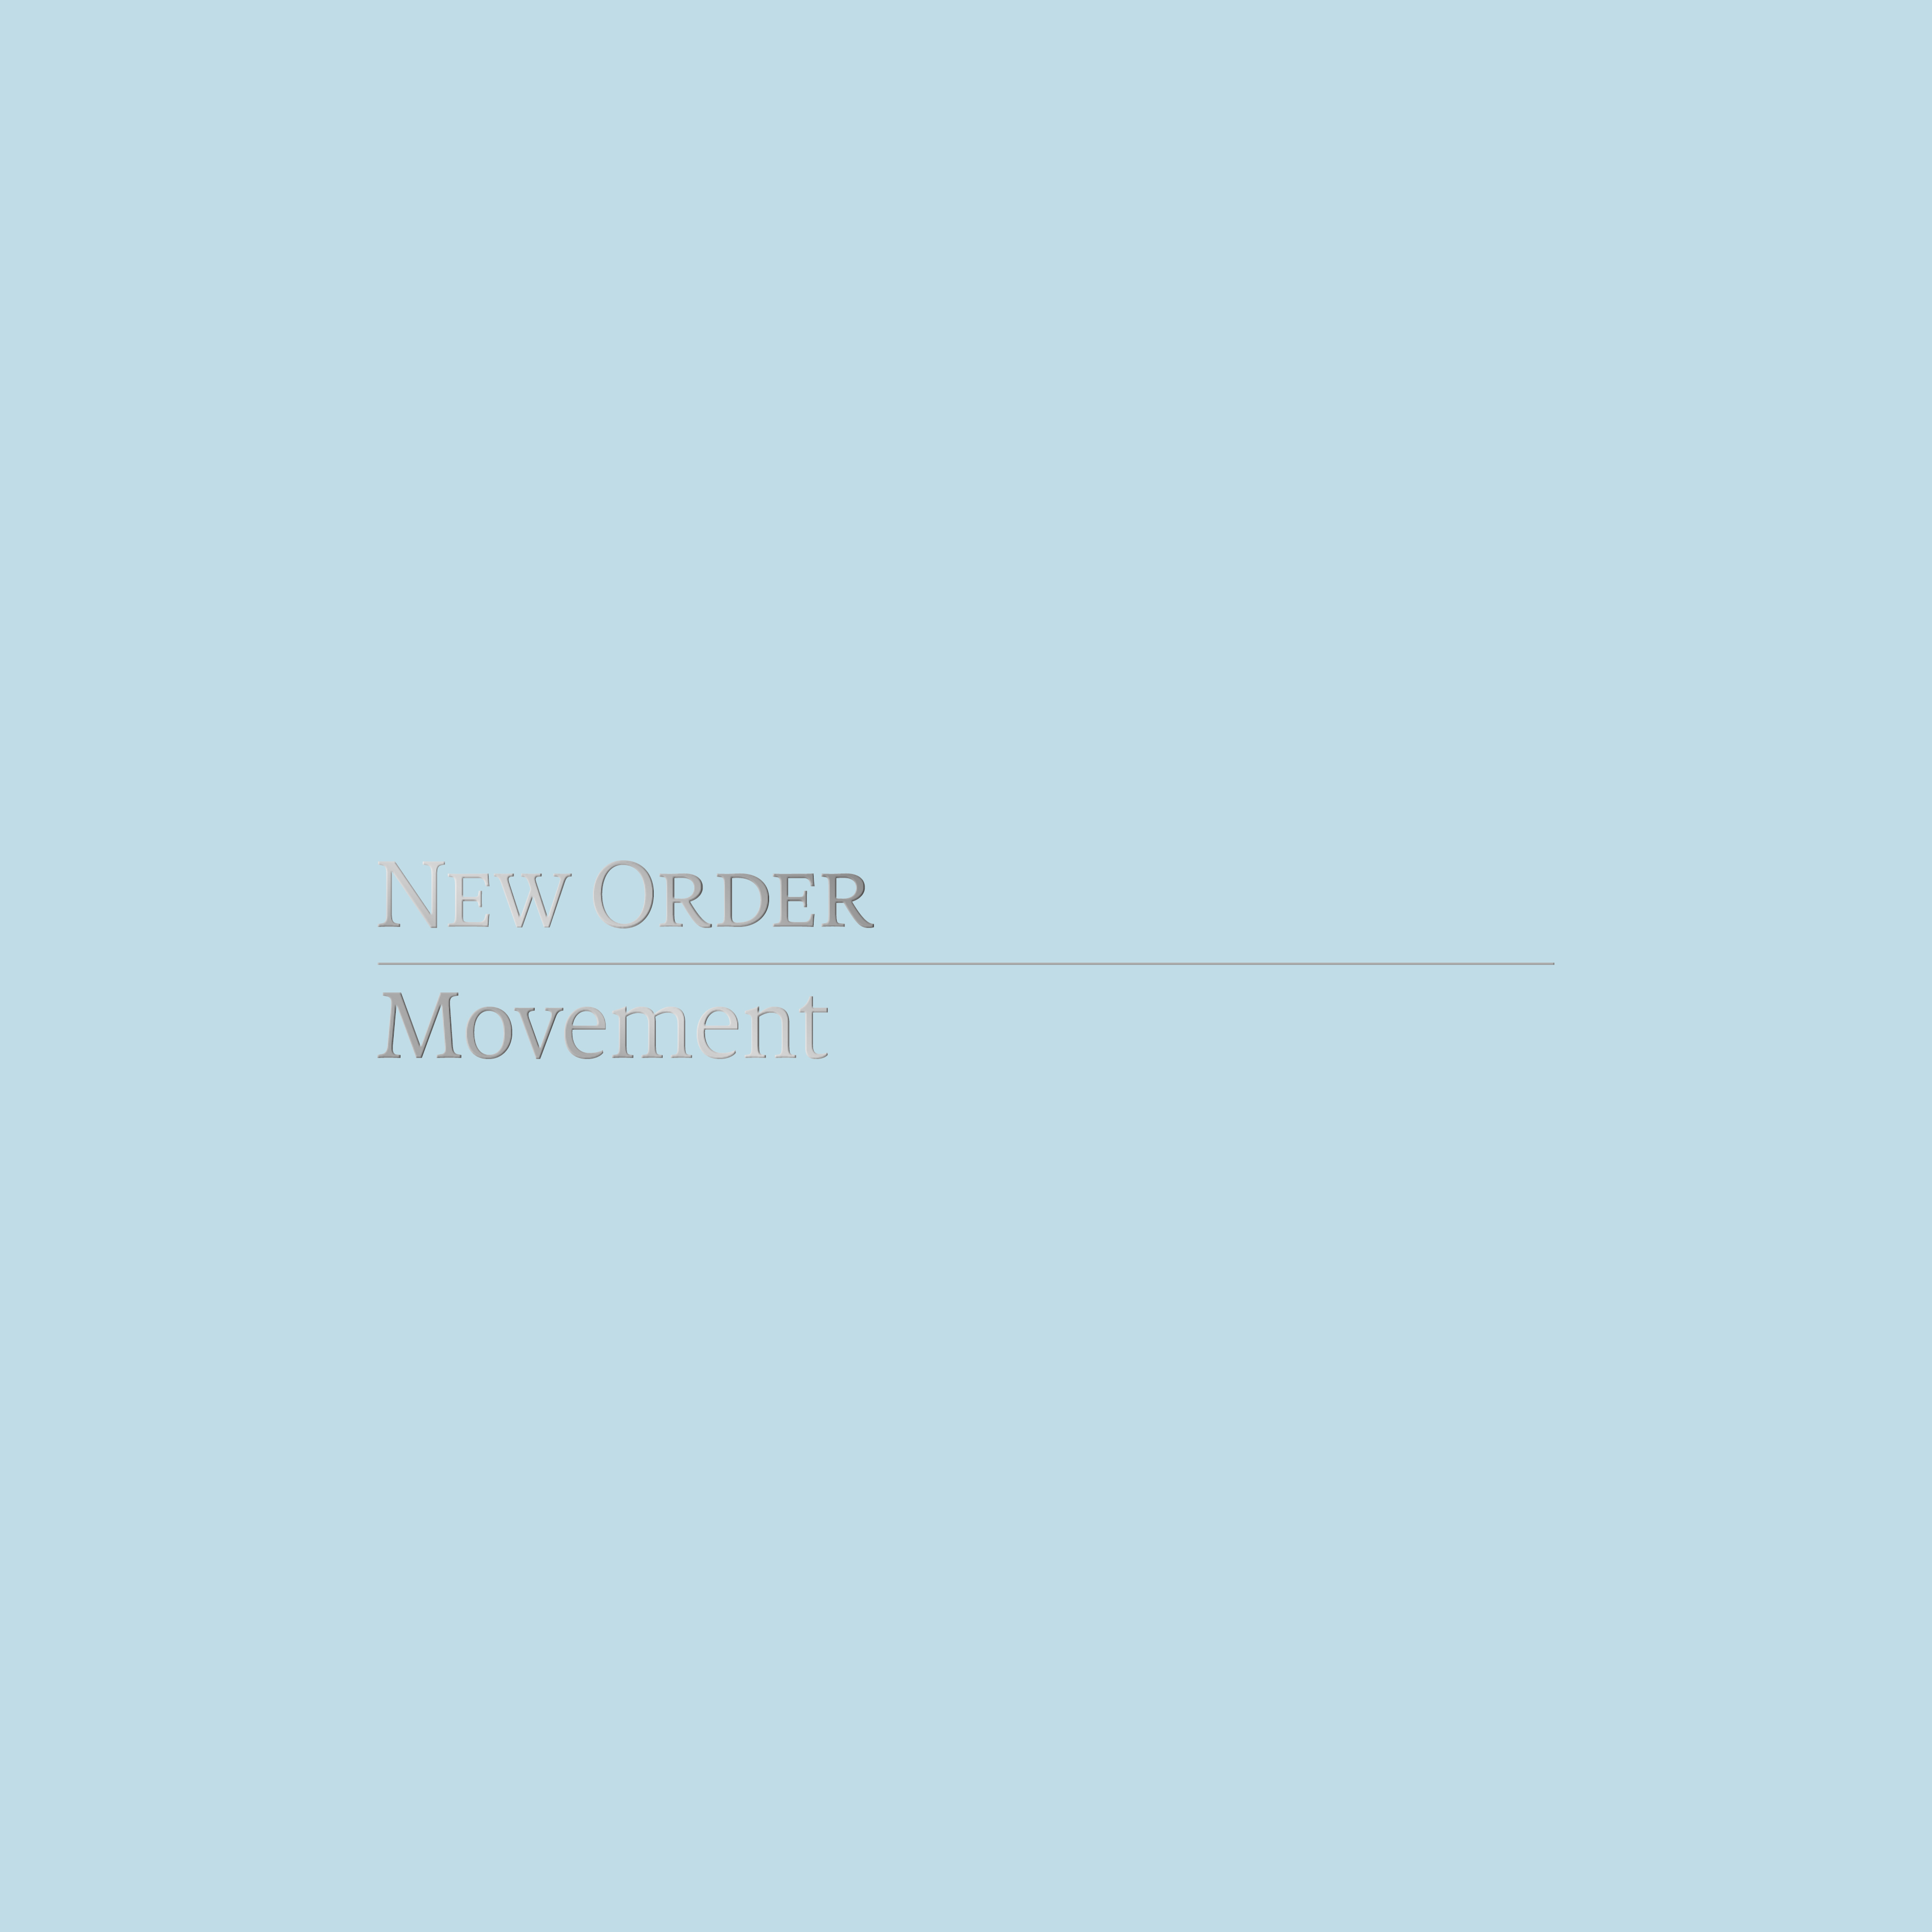 We have new order. New order Movement. New order обложки альбомов. New order 1981. New order Movement Cover.